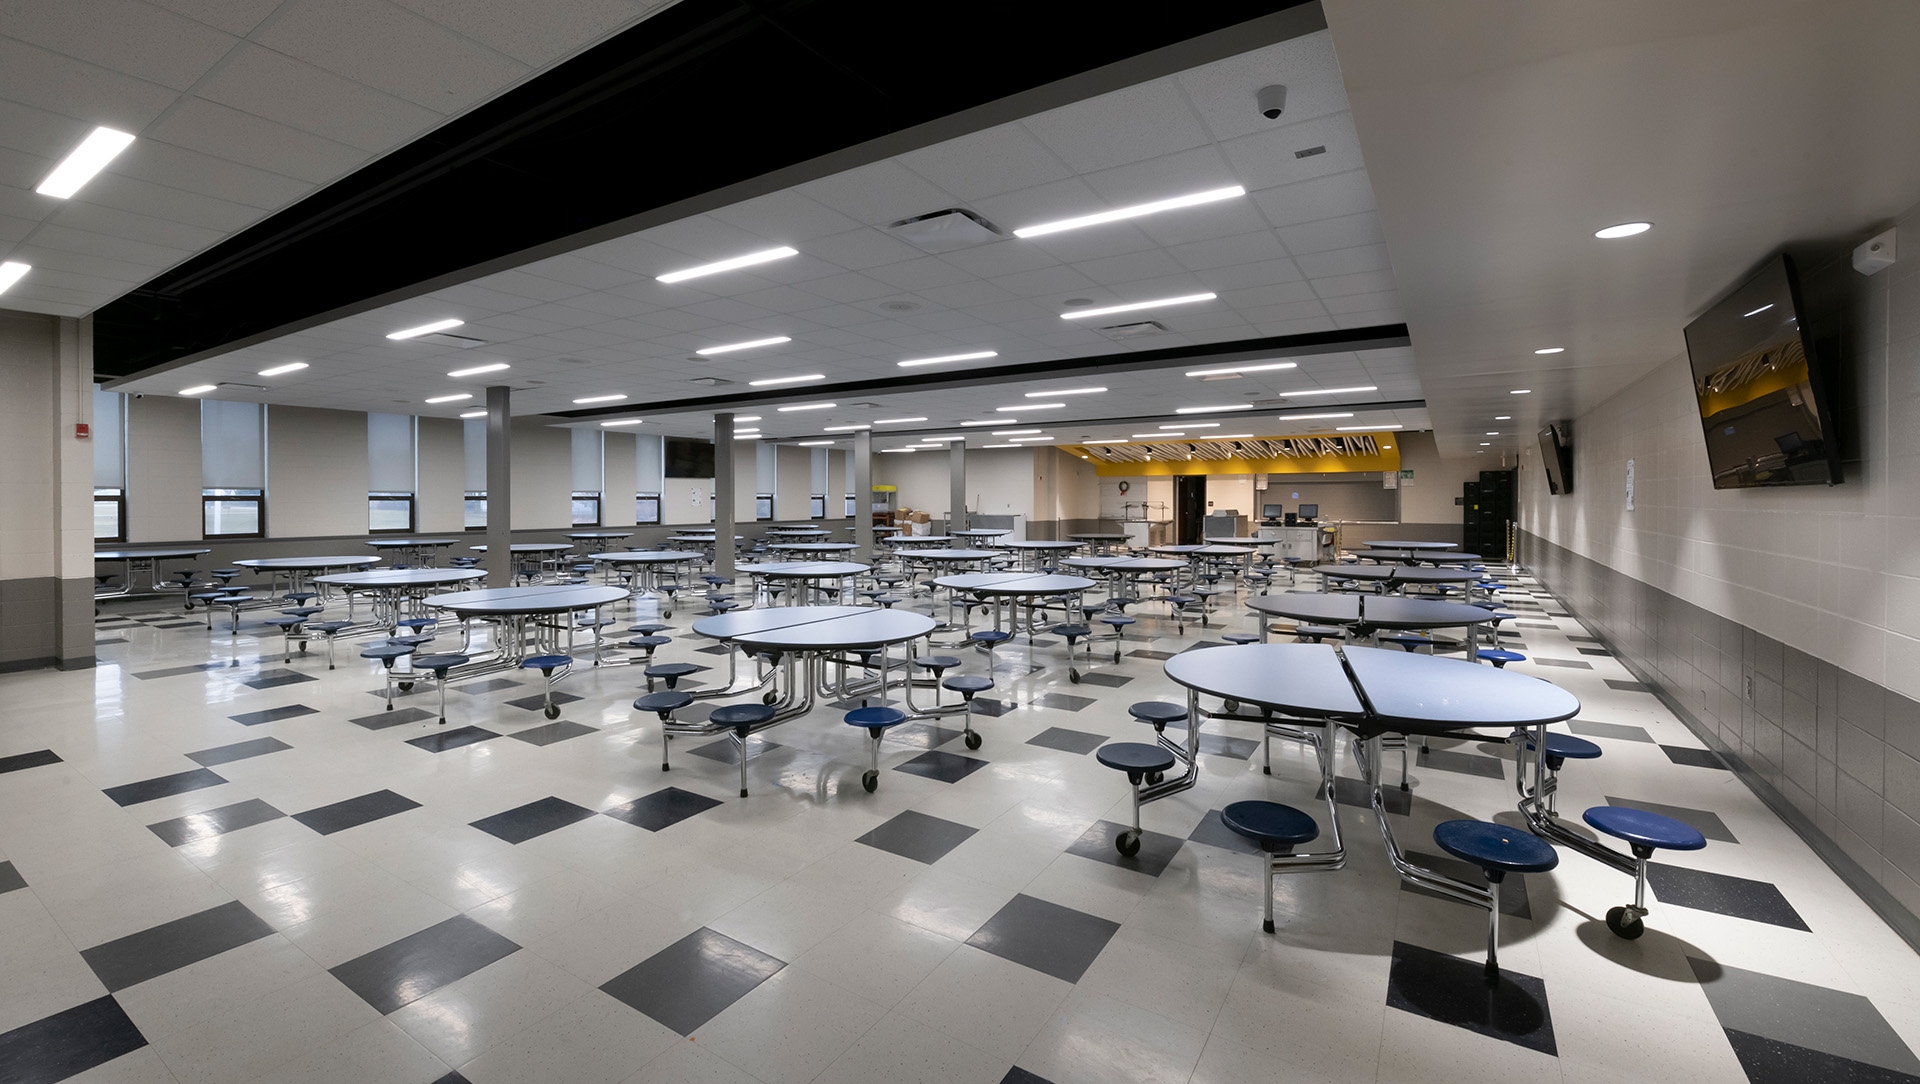 Lane Middle School Cafeteria